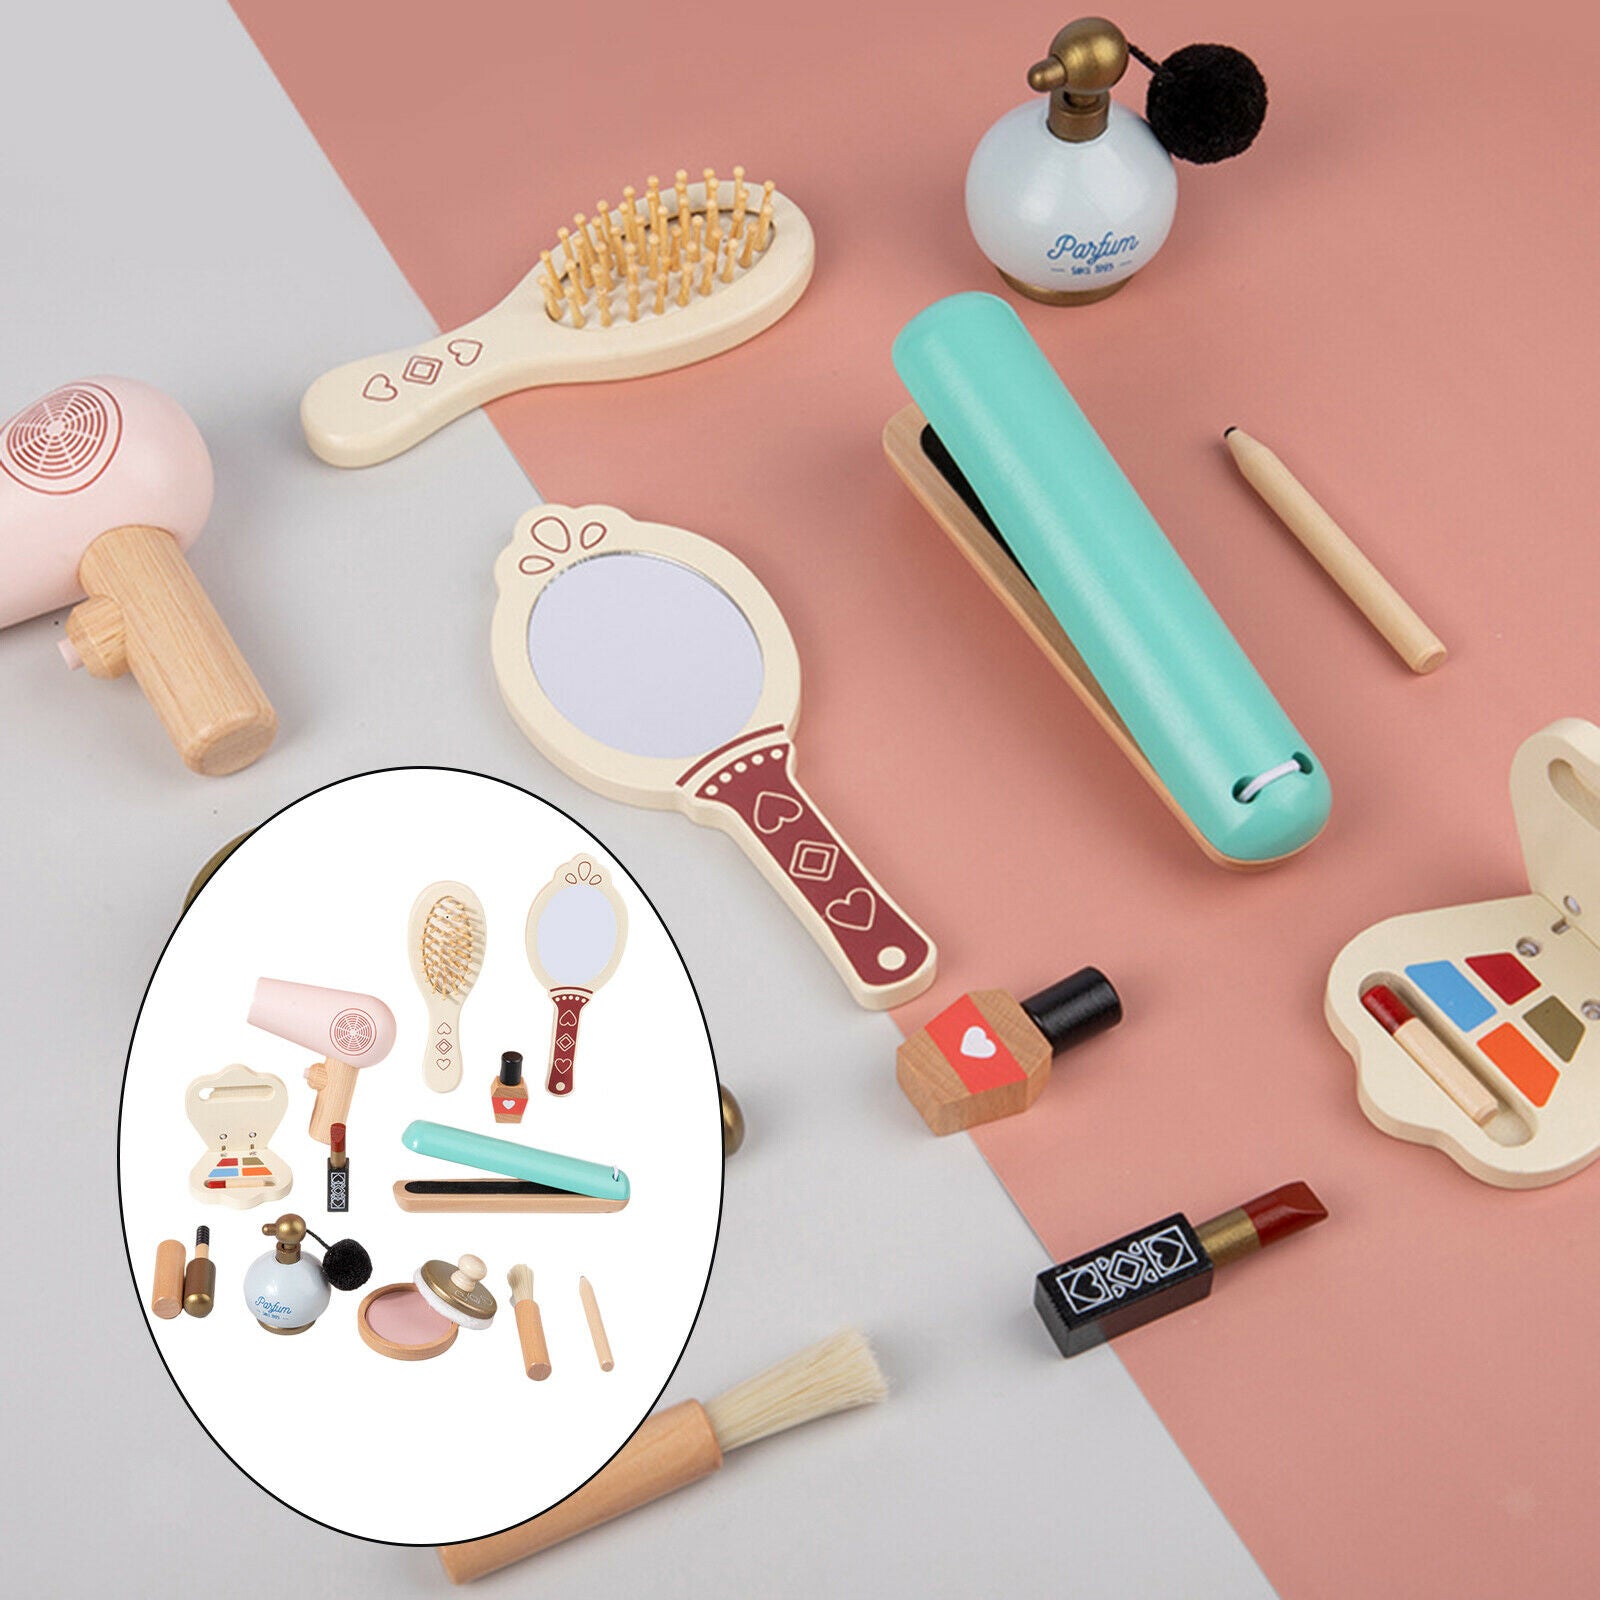 12pcs Wooden Kids Makeup Kit Role Play Curling Iron Brush Perfume Gifts